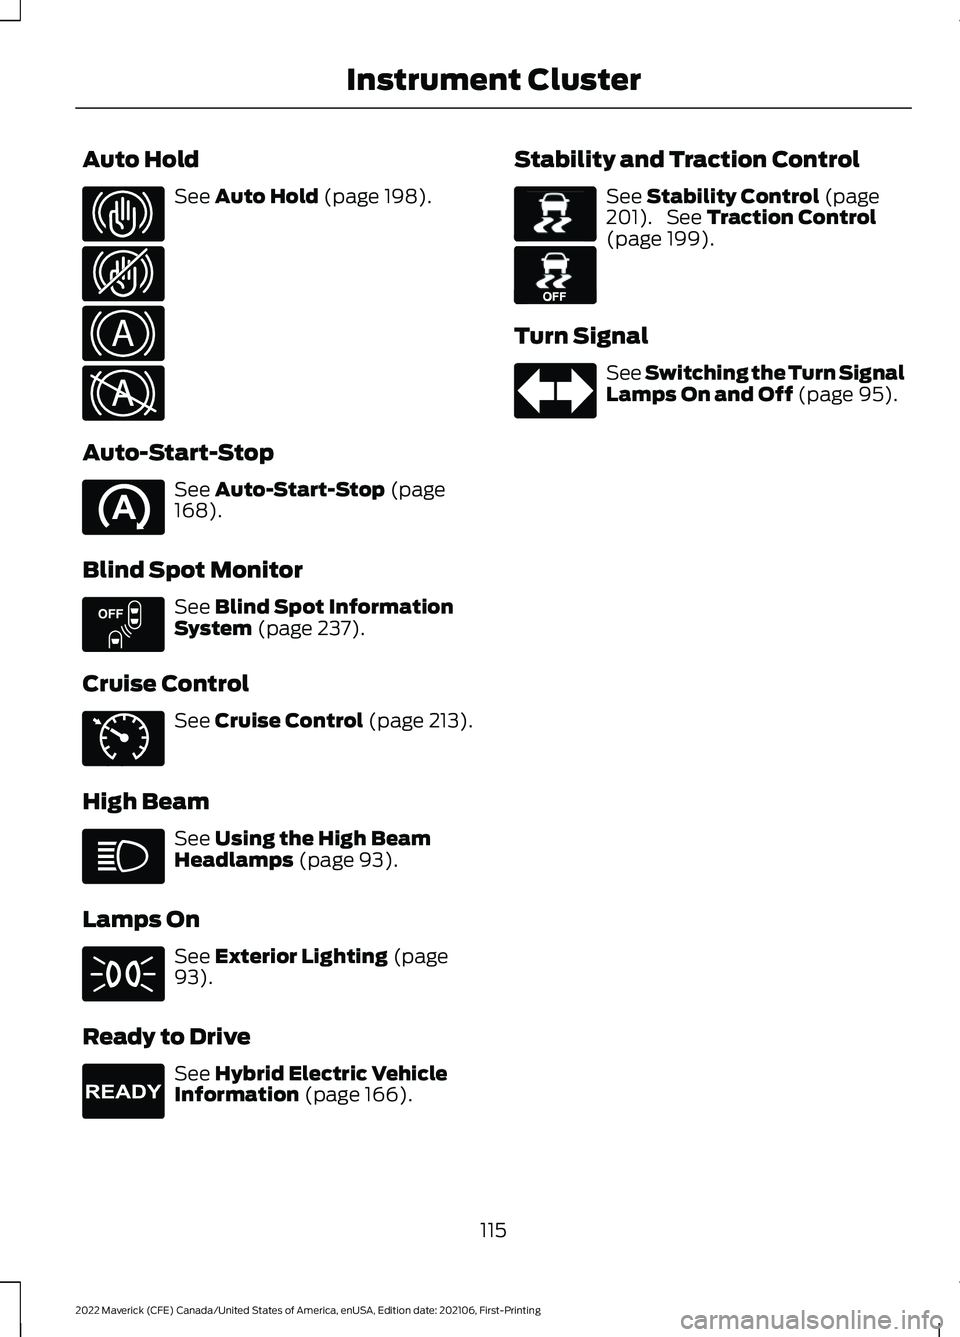 FORD MAVERICK 2022  Owners Manual Auto Hold
See Auto Hold (page 198).
Auto-Start-Stop See 
Auto-Start-Stop (page
168).
Blind Spot Monitor See 
Blind Spot Information
System (page 237).
Cruise Control See 
Cruise Control (page 213).
Hi